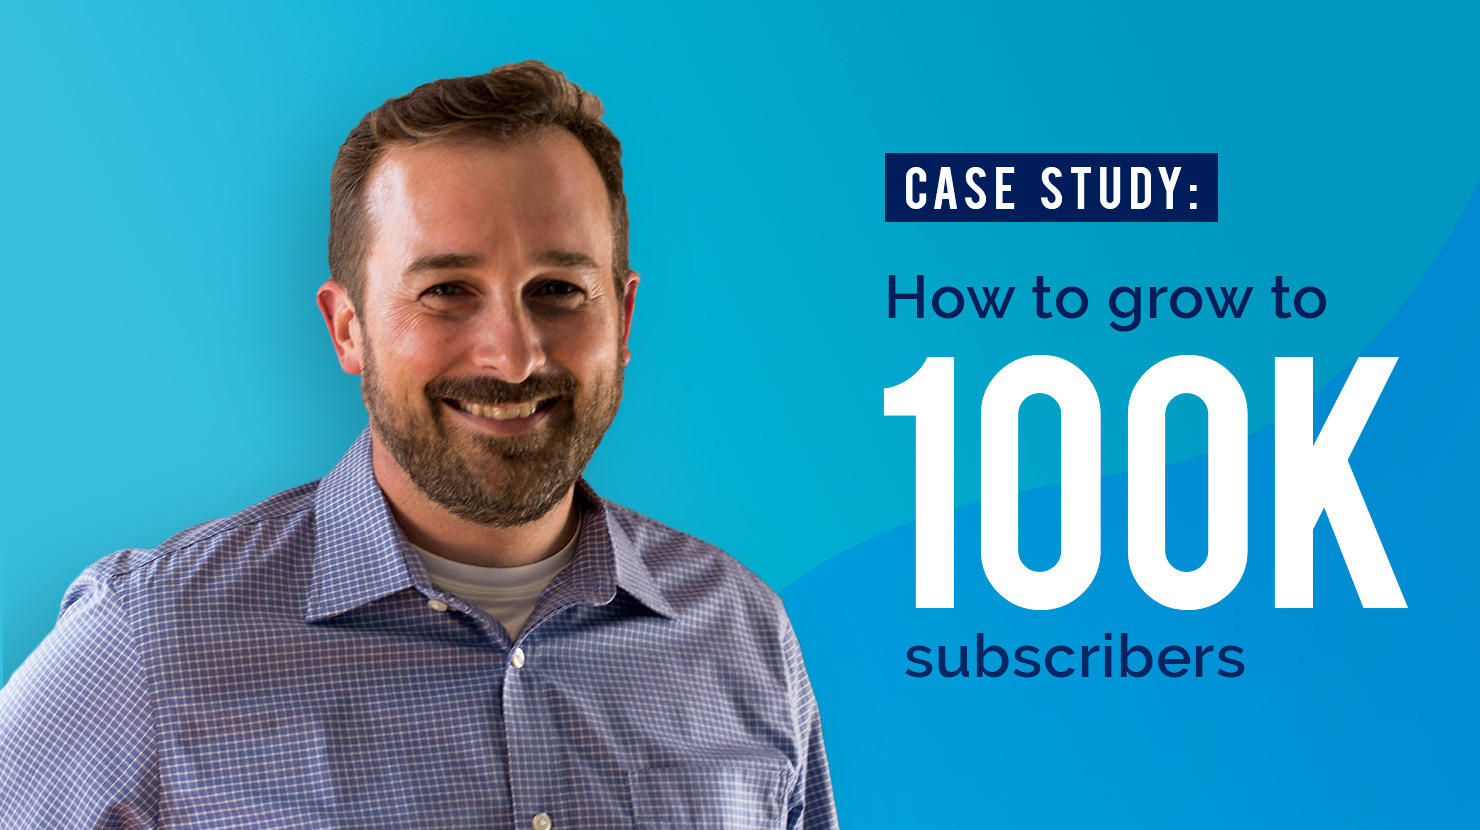 How to grow to 100K subscribers: An interview with Rob Reynolds, CEO of Directade